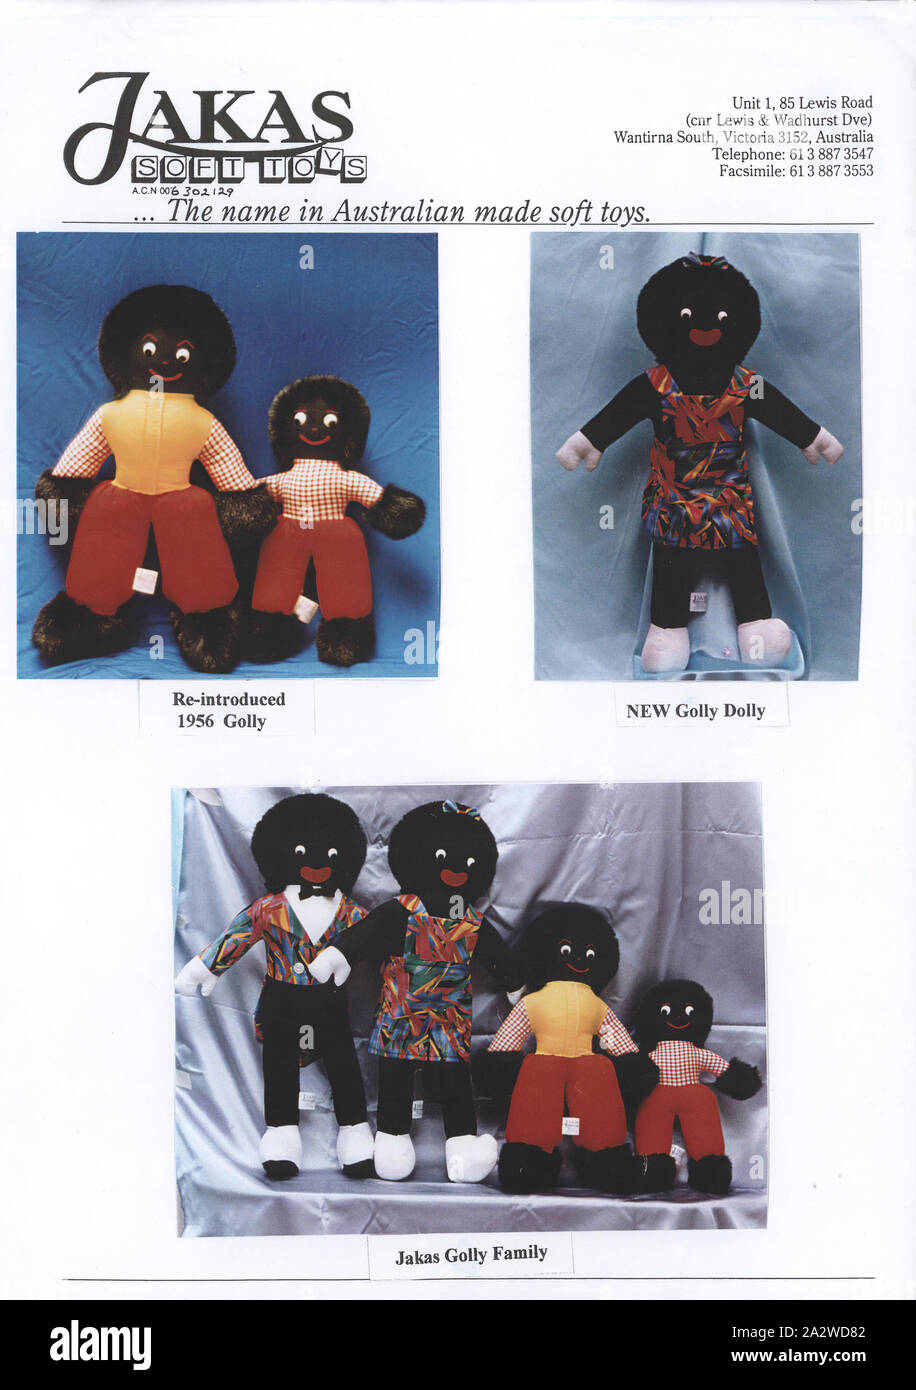 Advertising Flyer - Jakas Soft Toys, Golly Dolls, Melbourne, circa 1990s, A single page advertising flyer showing the range of 'golliwog' soft toys available. Colour images show the 1956 reintroduced 'Golly' soft toy designs, the new 'Golly Dolly' and the 'Jakas Golly Family'. Jakas Soft Toys was a Melbourne-based company which designed and manufactured genuine high quality soft toys from 1956. Their range included teddy bears, golliwogs and Australian native Stock Photo